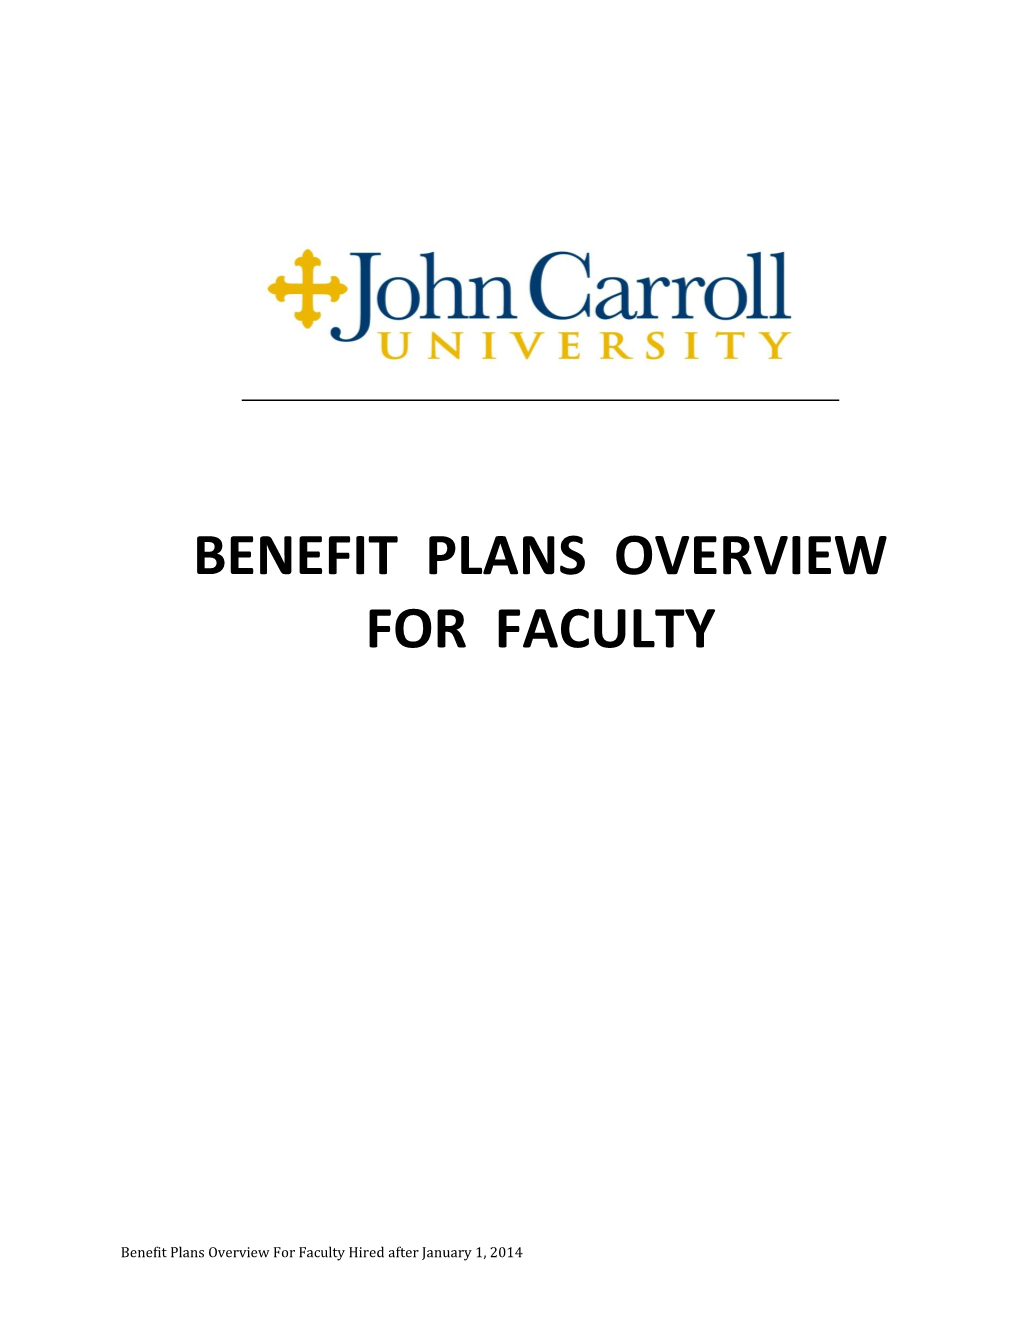 Benefit Plans Overview for Faculty